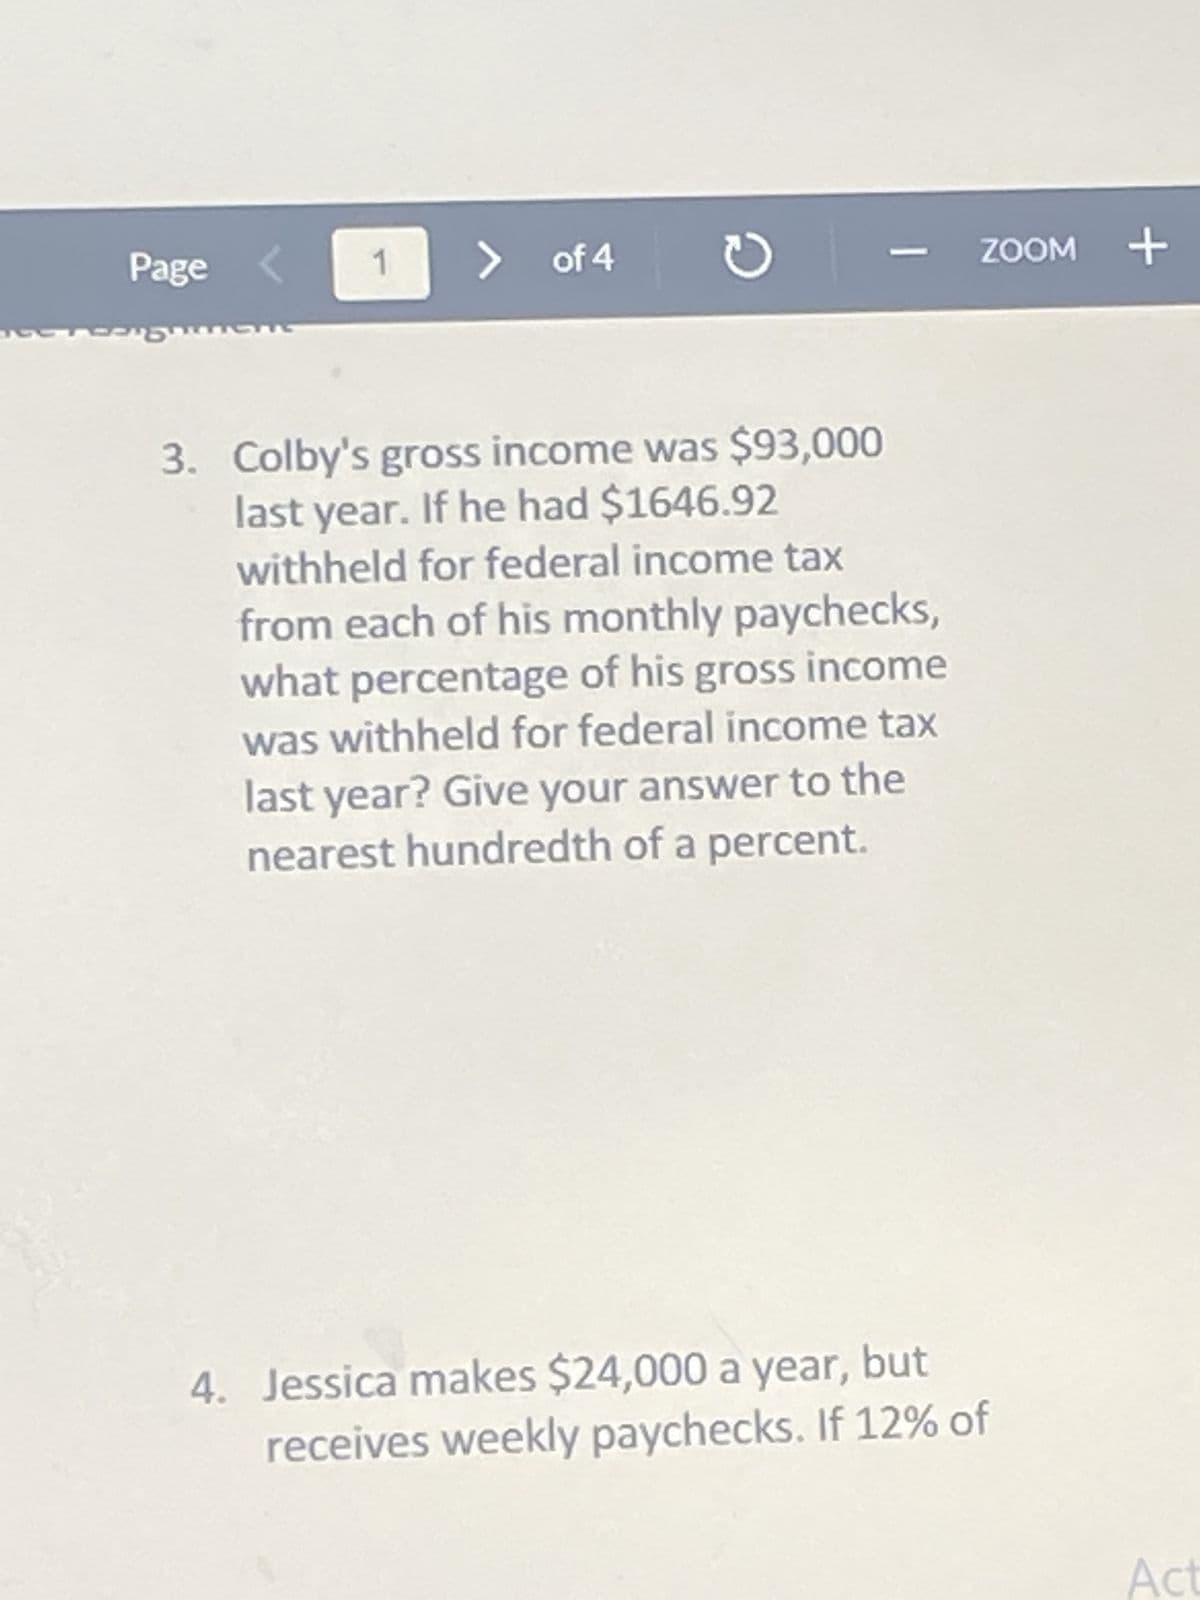 1
> of 4
3. Colby's gross income was $93,000
last year. If he had $1646.92
withheld for federal income tax
from each of his monthly paychecks,
what percentage of his gross income
was withheld for federal income tax
last year? Give your answer to the
nearest hundredth of a percent.
4. Jessica makes $24,000 a year, but
receives weekly paychecks. If 12% of
Page
Pen
C
ZOOM +
Act